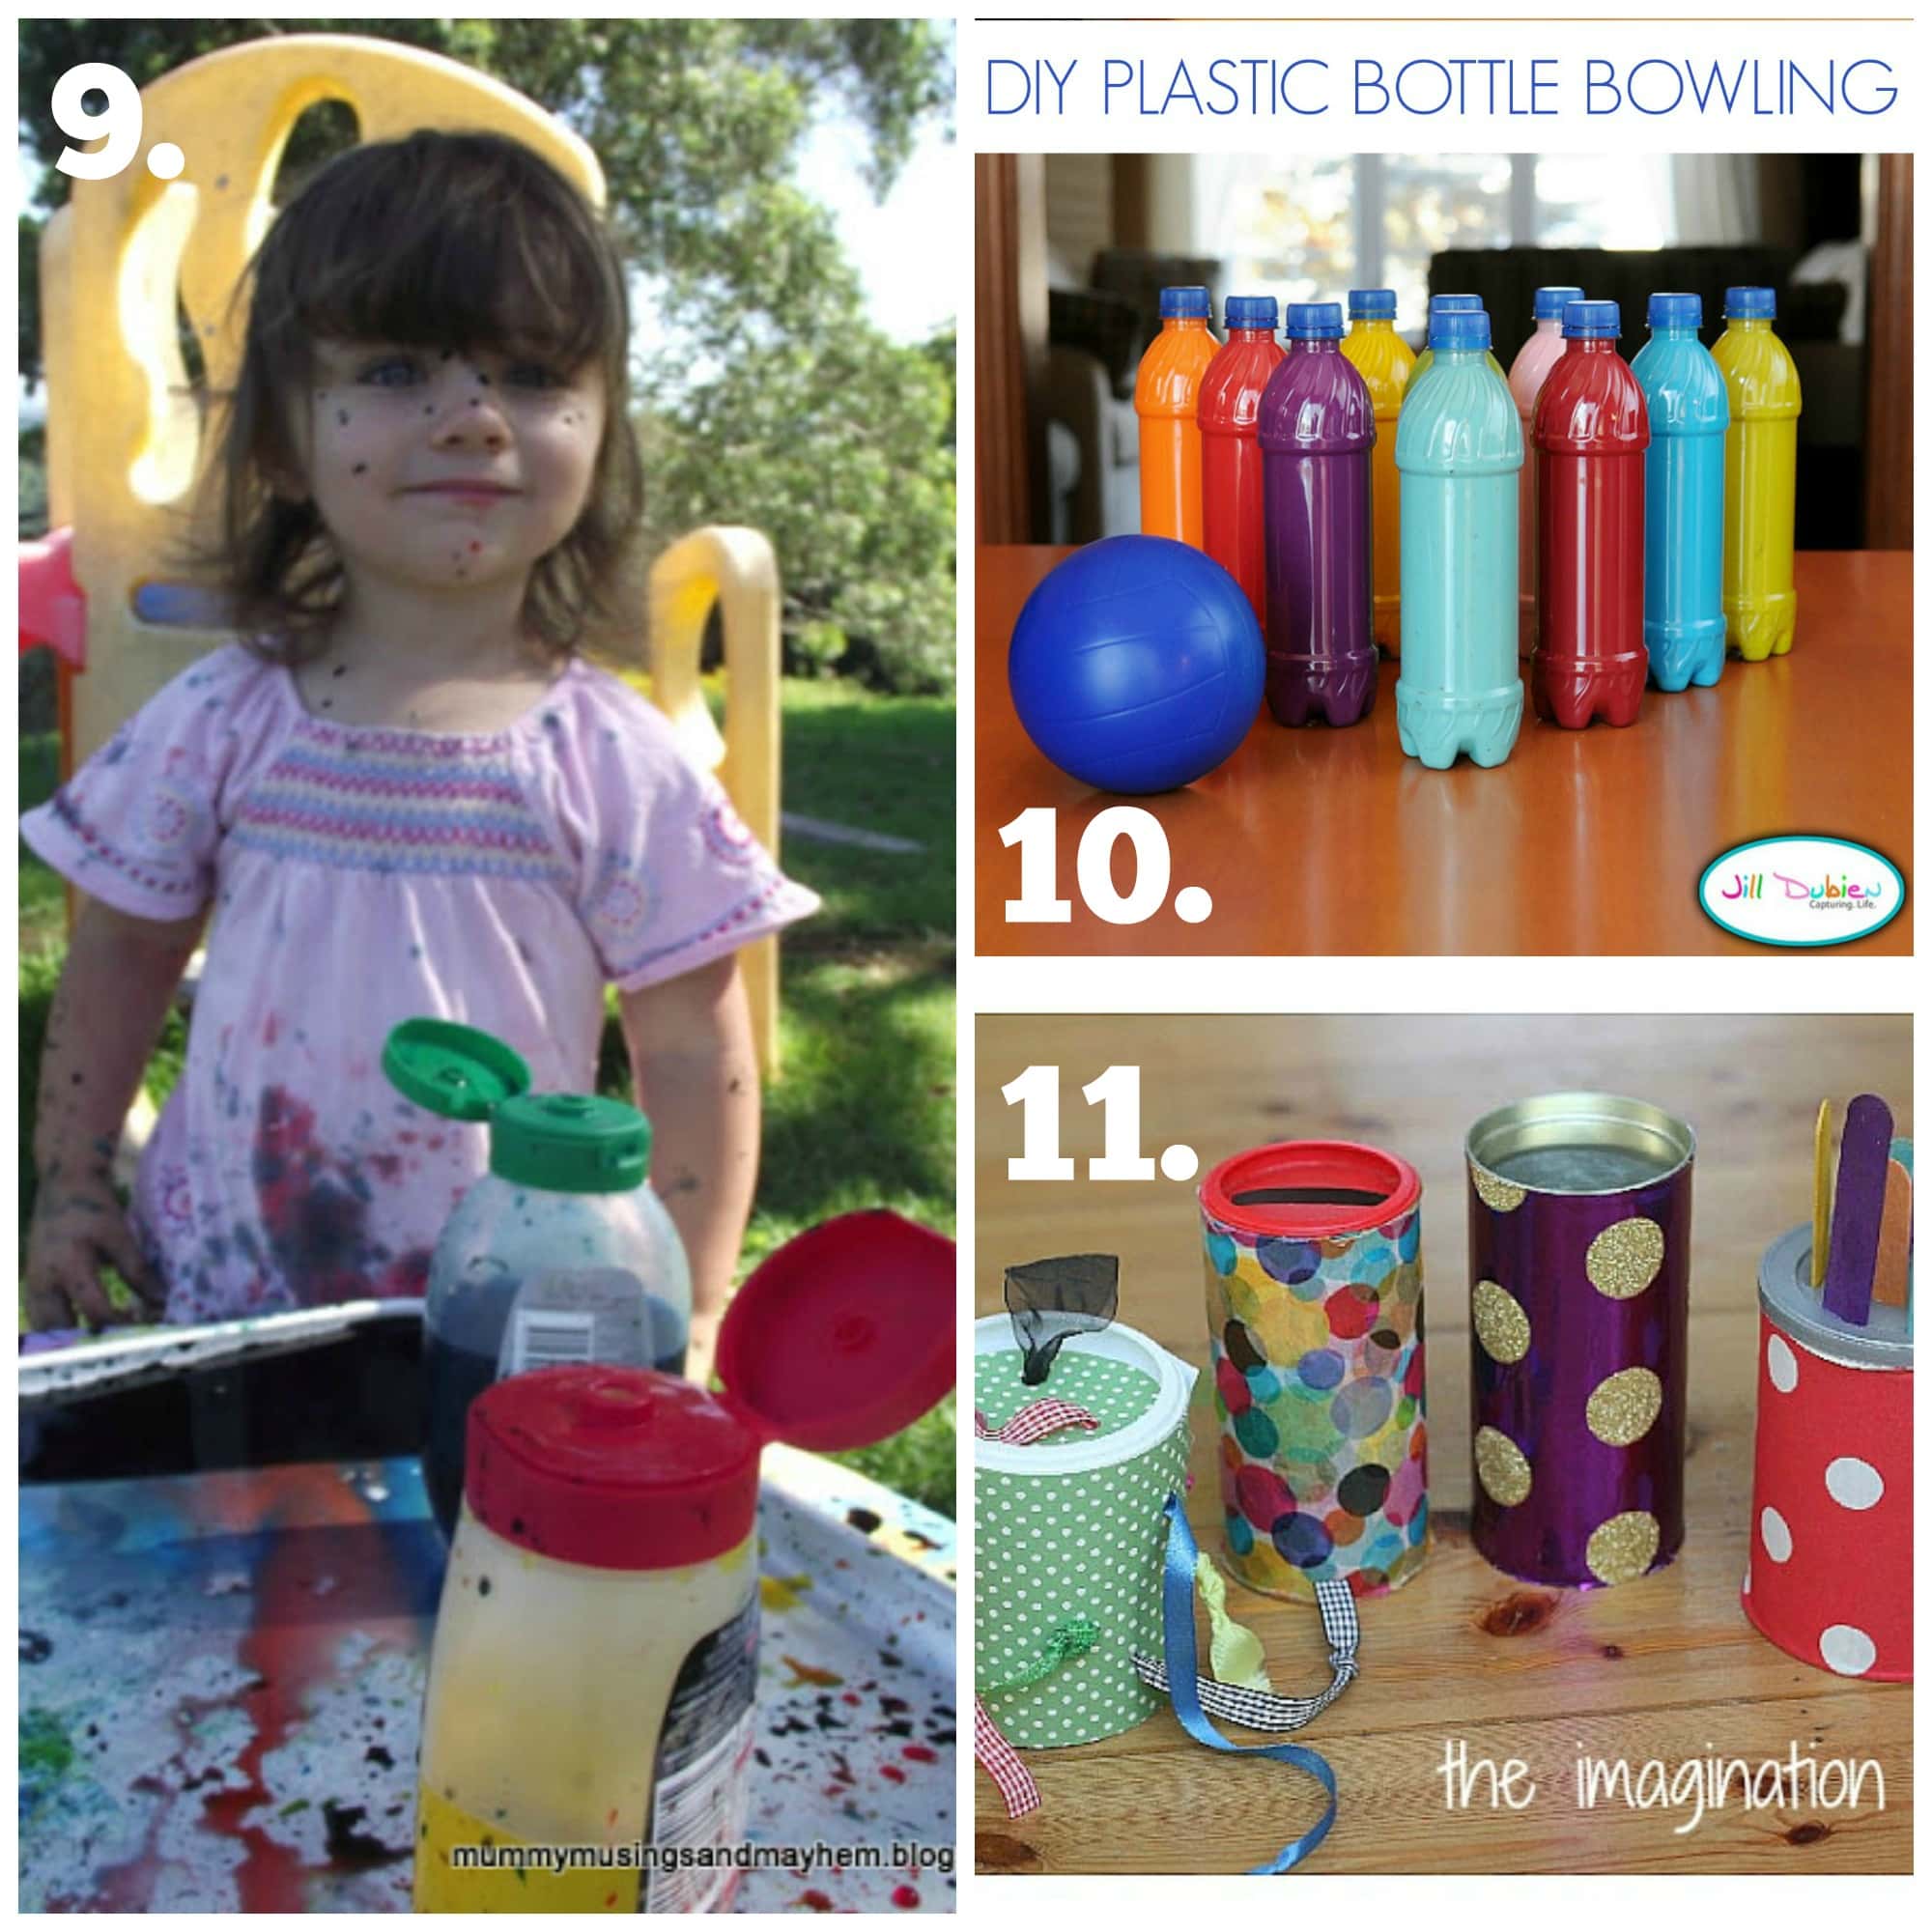 30 easy ideas to make your own baby and toddler toys using recycled materials from around the home. #3 in the Mummy Musings and Mayhem Recycled Play Series!